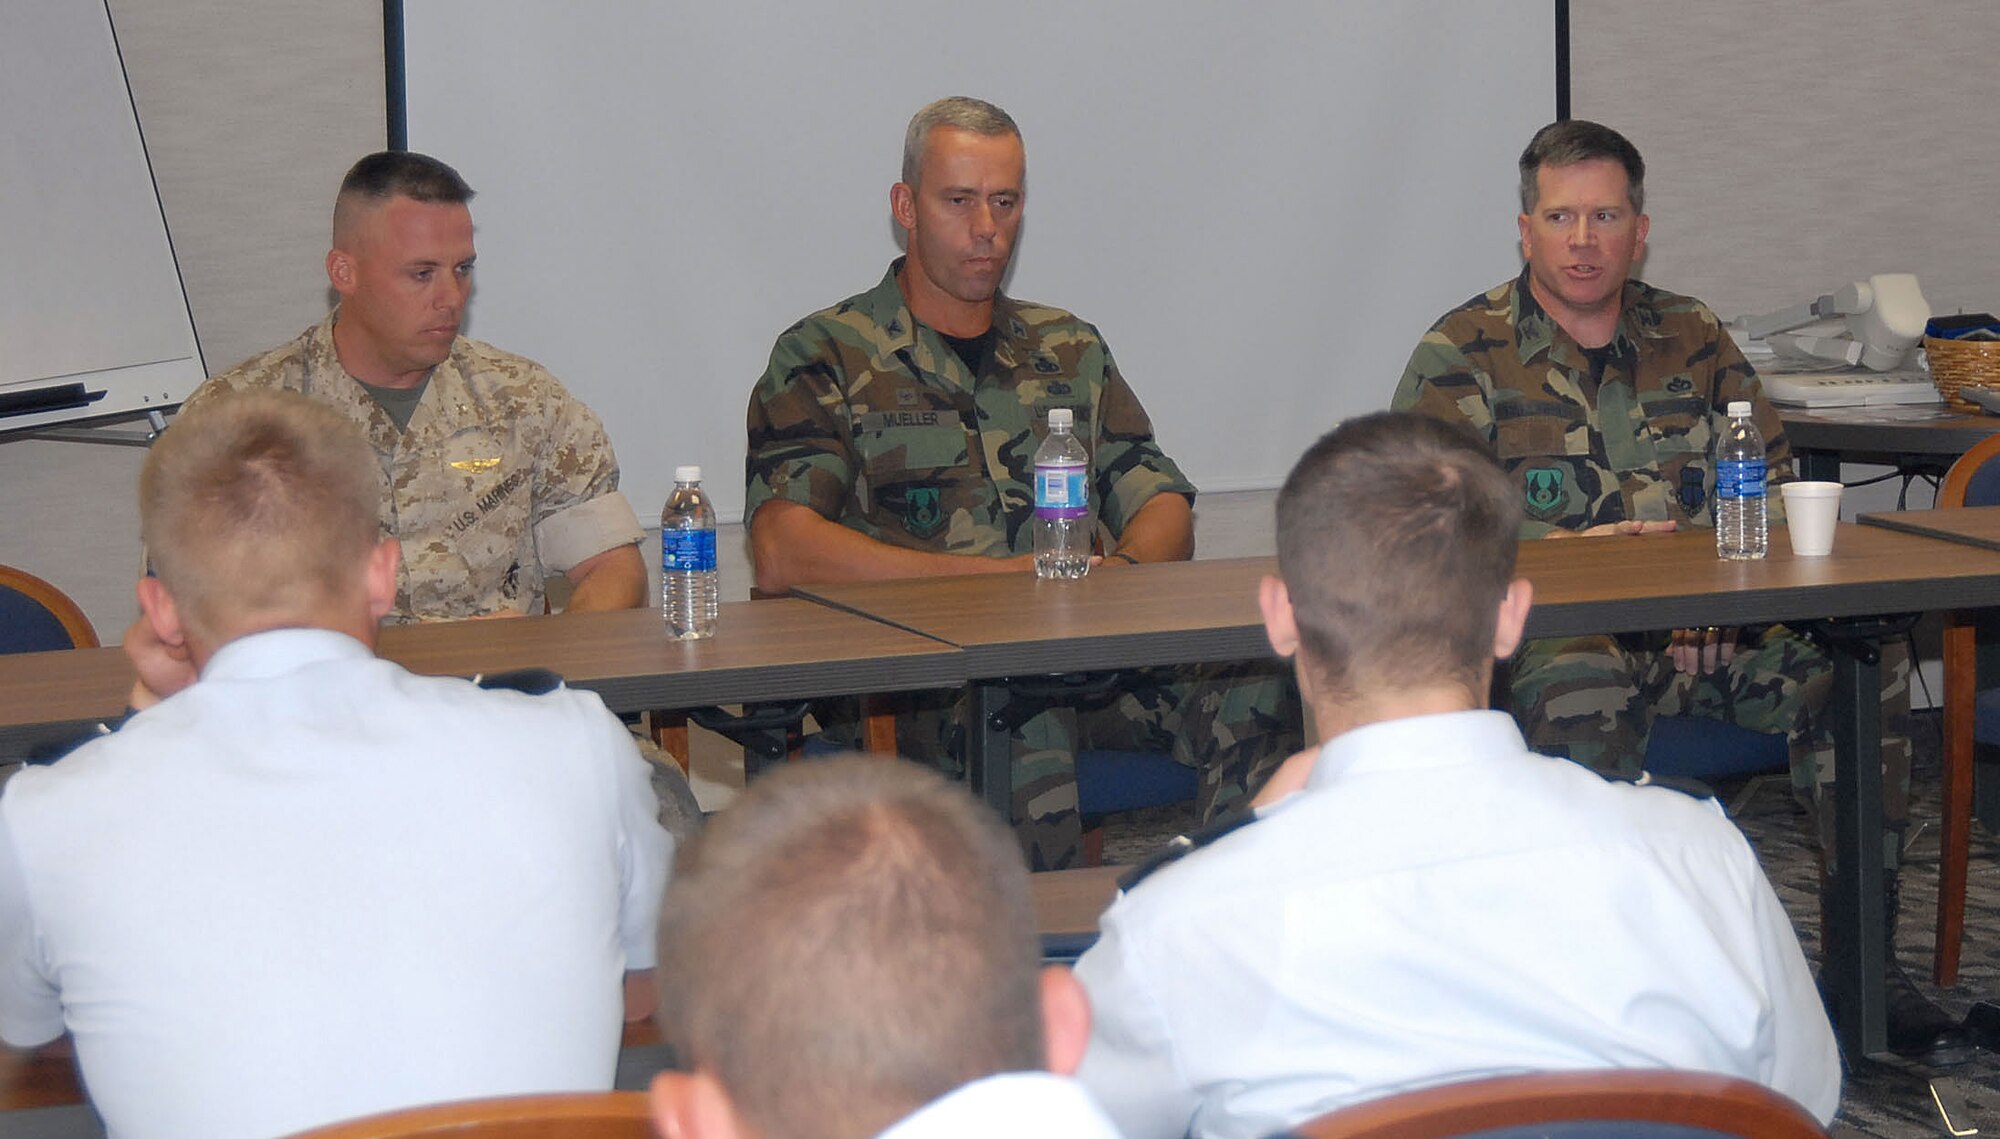 Col. Bryan Gallagher (right), 95th Air Base Wing commander, Col. Mark Mueller (center), 412th Maintenance Group commander, and Marine Lt. Col. Thomas McCarthy (left), Marine Aircraft Group Detachment B commander, talk to Air Force Reserve Officers' Training Corps cadets during a senior leader seminar at the Conference Center here Tuesday. The commanders covered topics such as force reductions, joint service operations, the future of warfare and career devlopment advice. (Photo by Senior Airman Jason Hernandez)